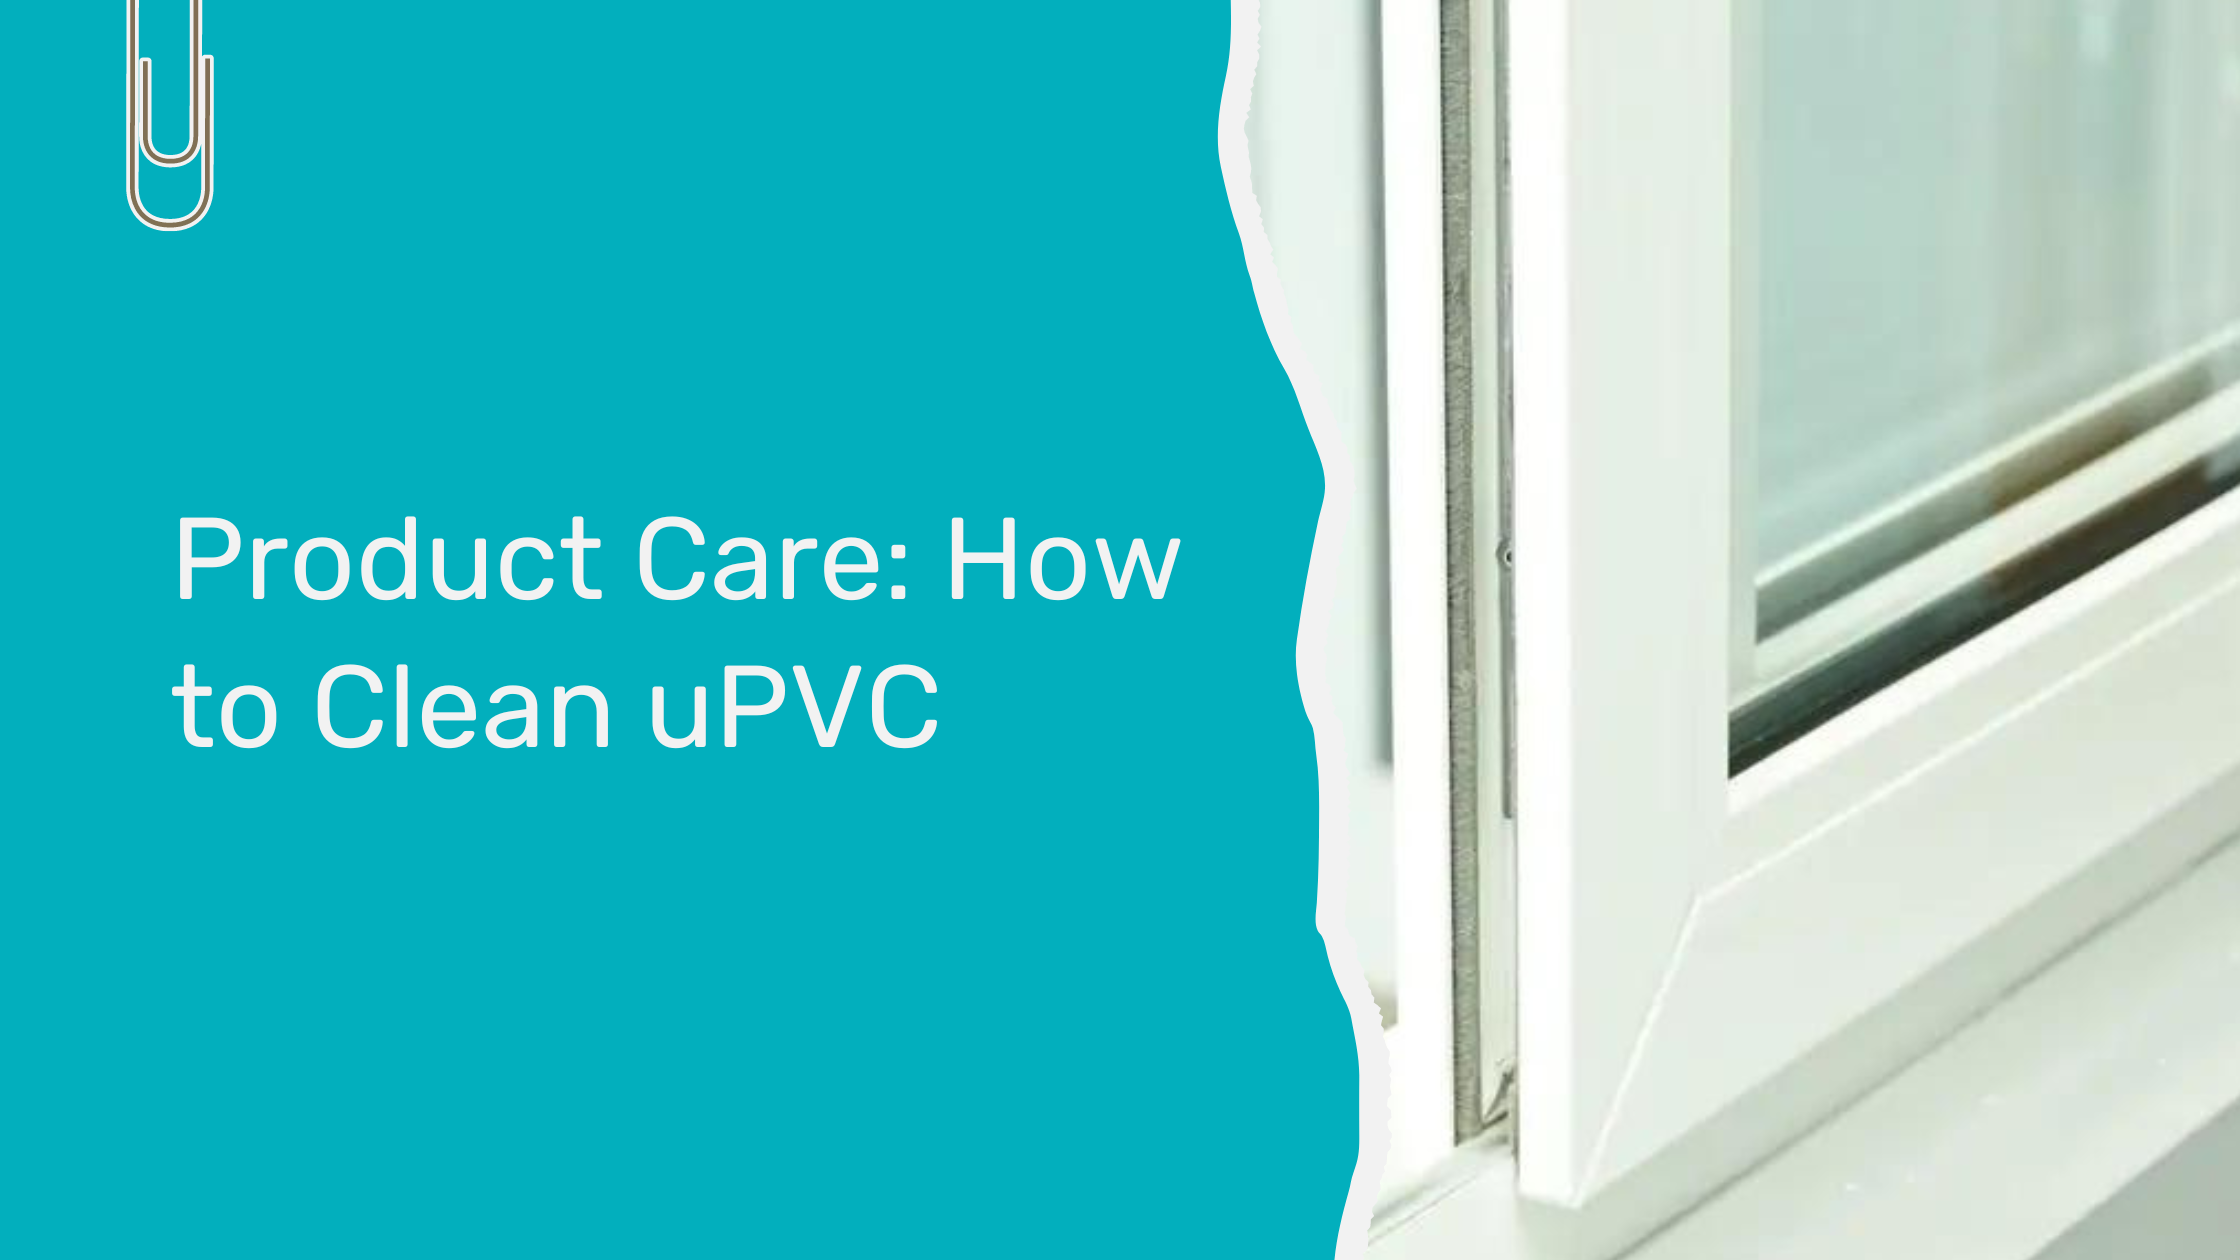 Product Care: How to Clean uPVC